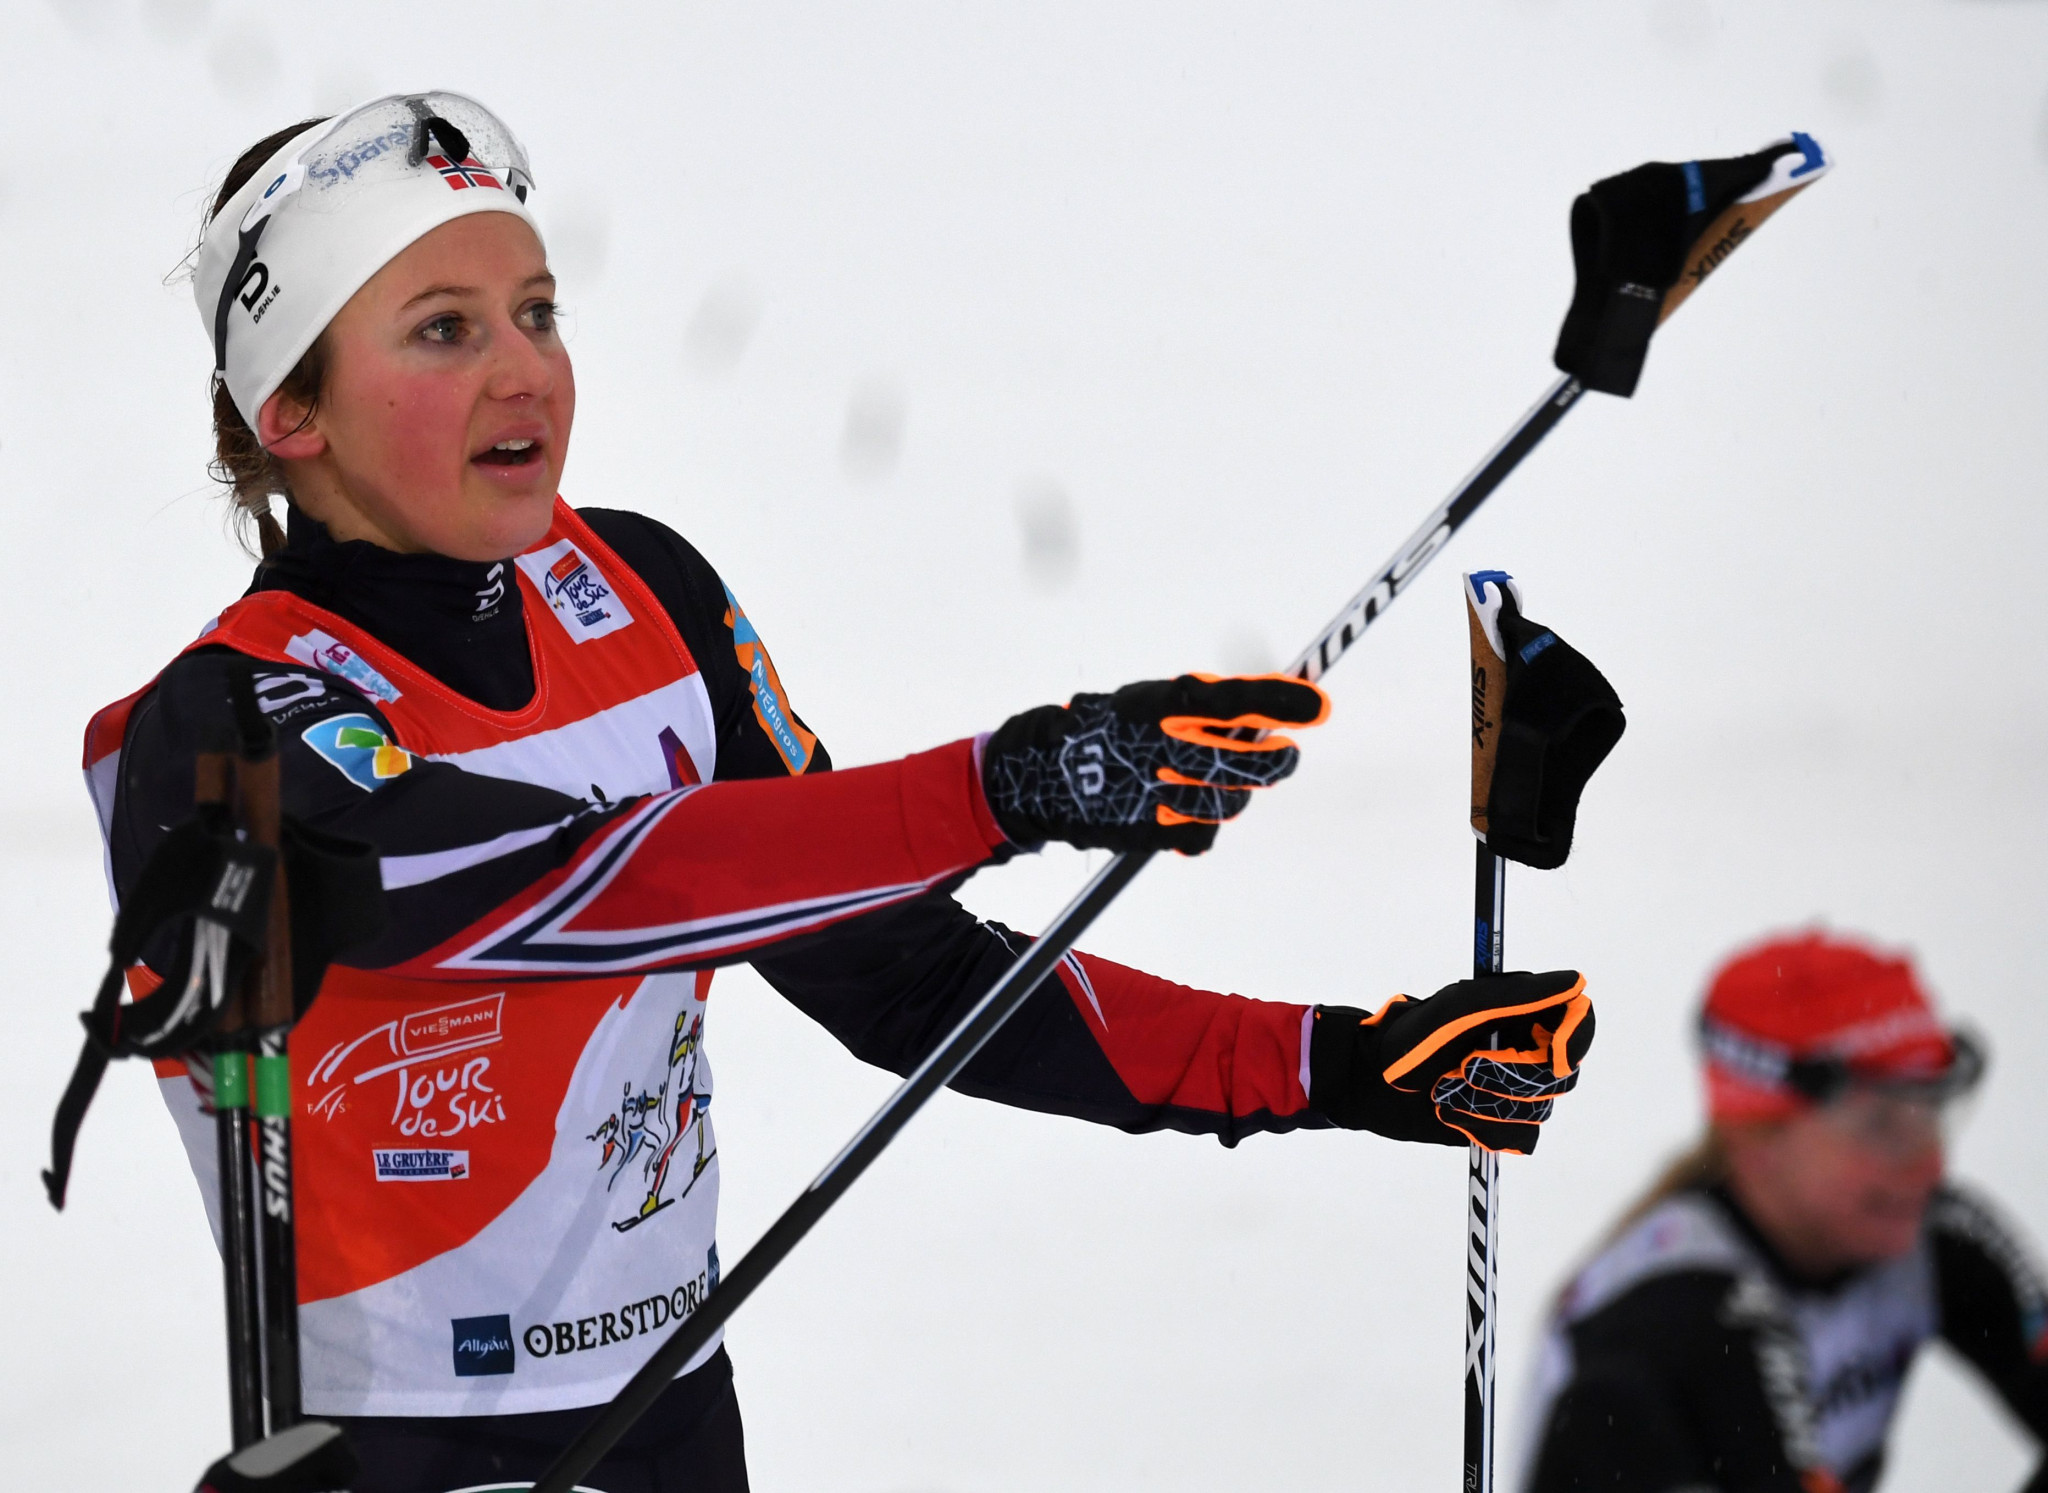 Østberg and Cologna closing in on Tour de Ski successes heading to Italian finale